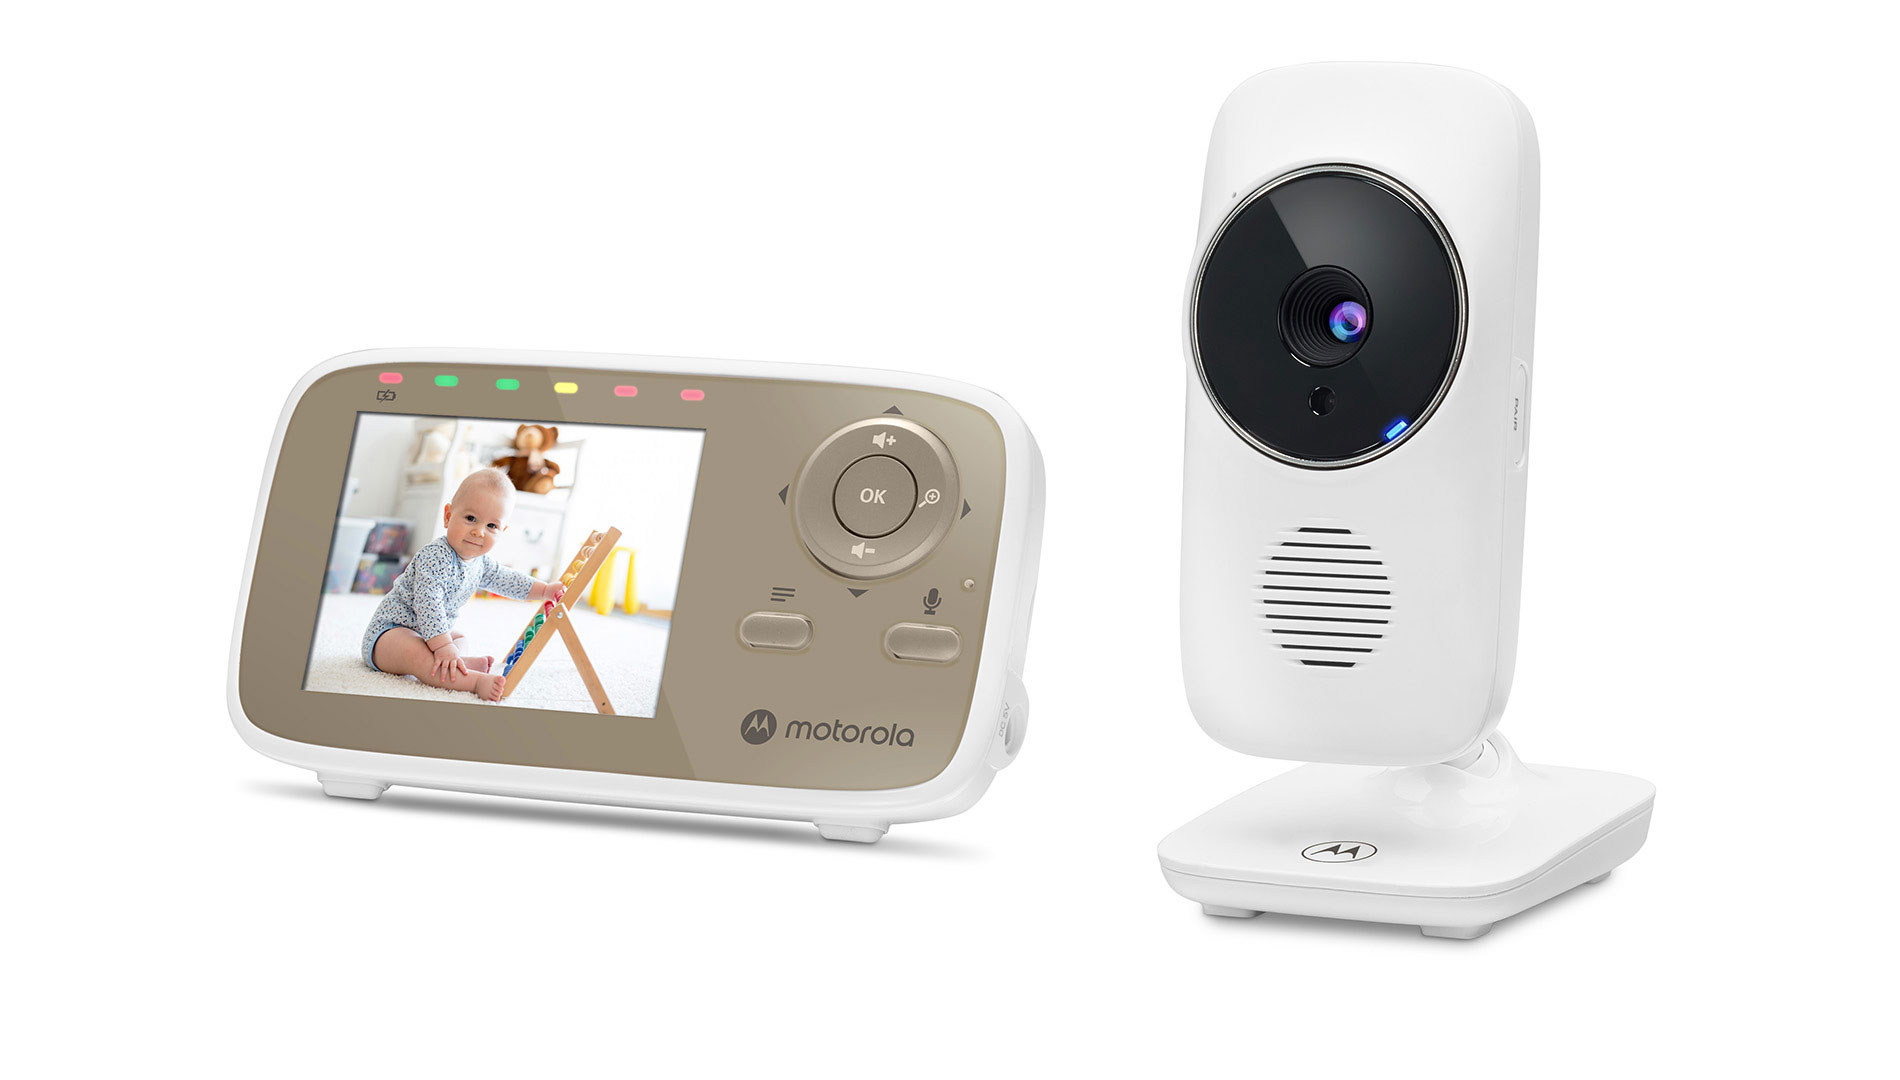 VM483 2.8 inch Video Baby Monitor - right side - Product image